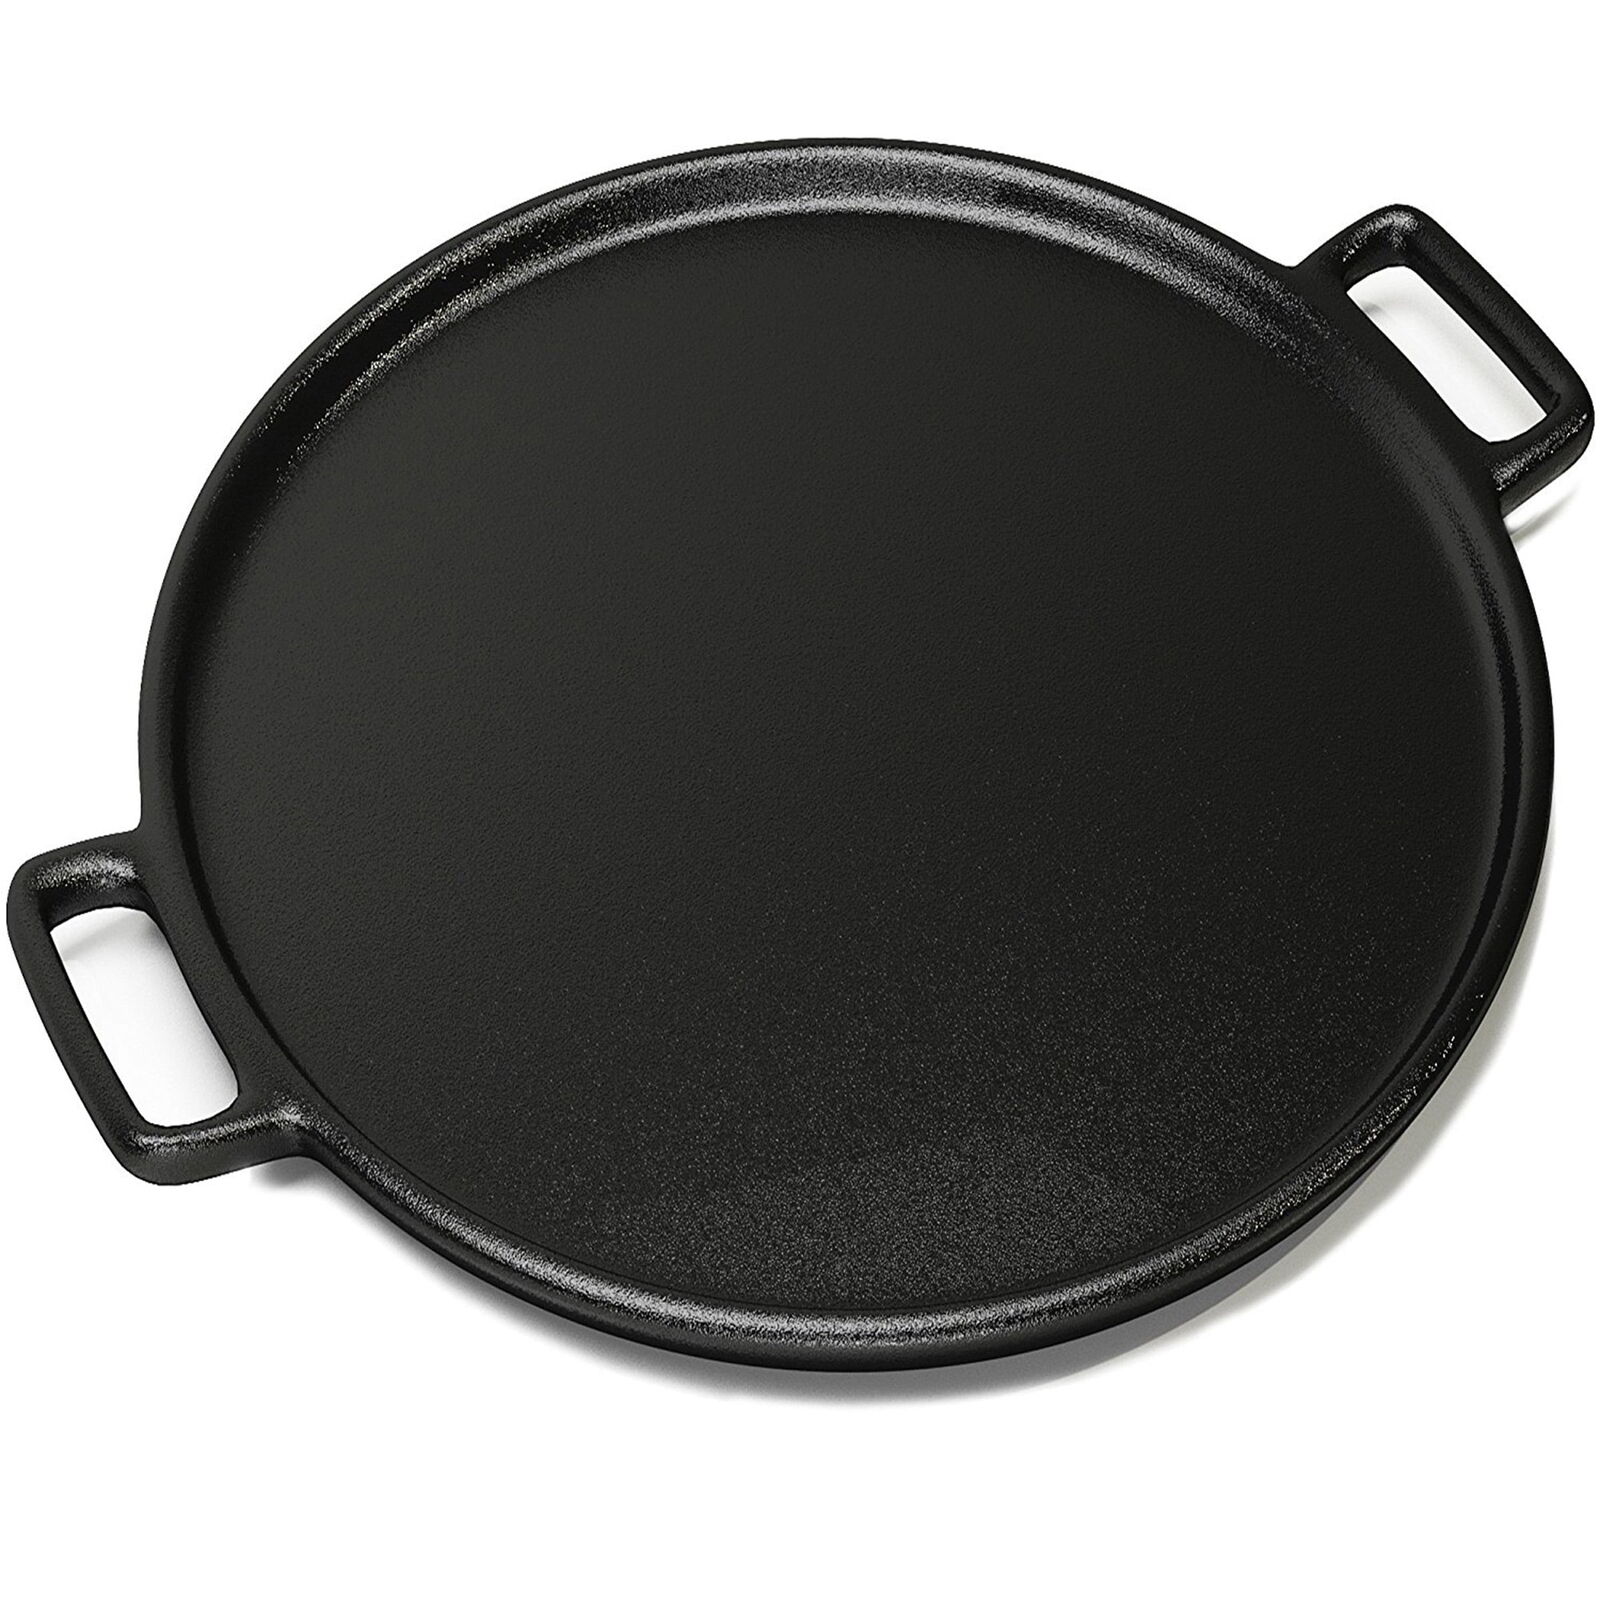 Pizza Pan Cast Iron Skillet Kitchen Cookware Frying Baking Cooking14'' Black